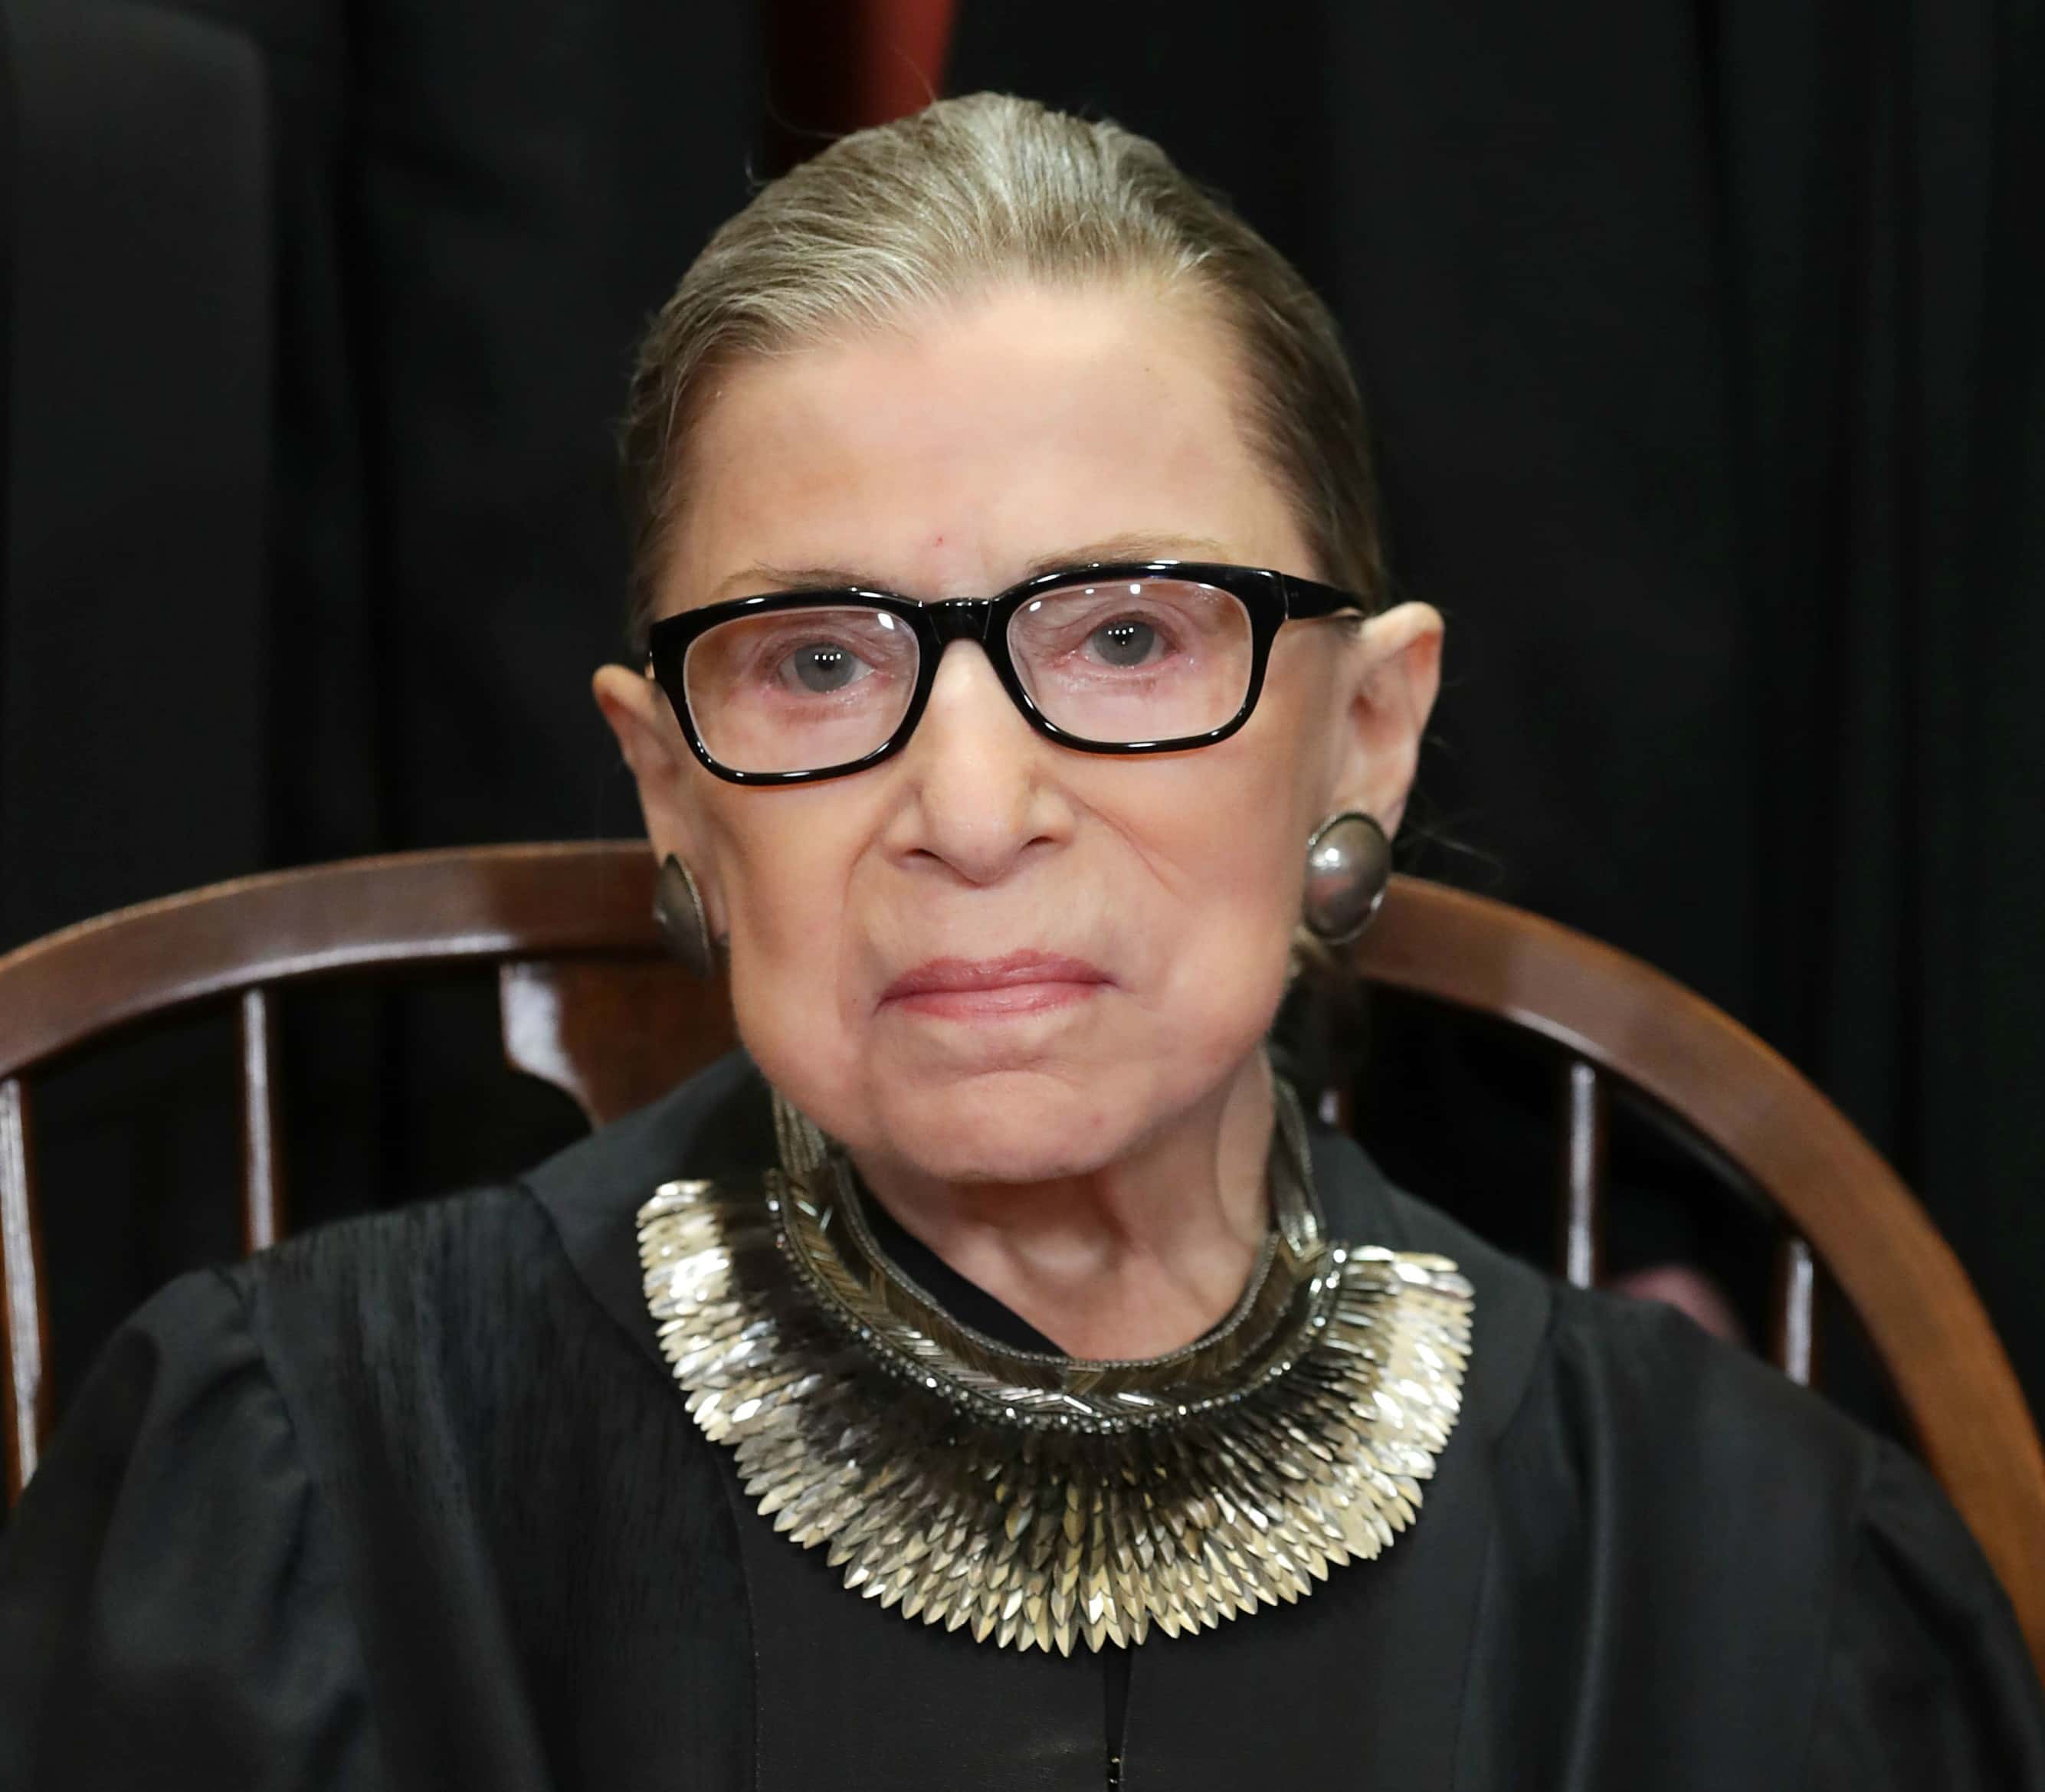 42 Powerful Facts About Ruth Bader Ginsburg The Notorious Rbg